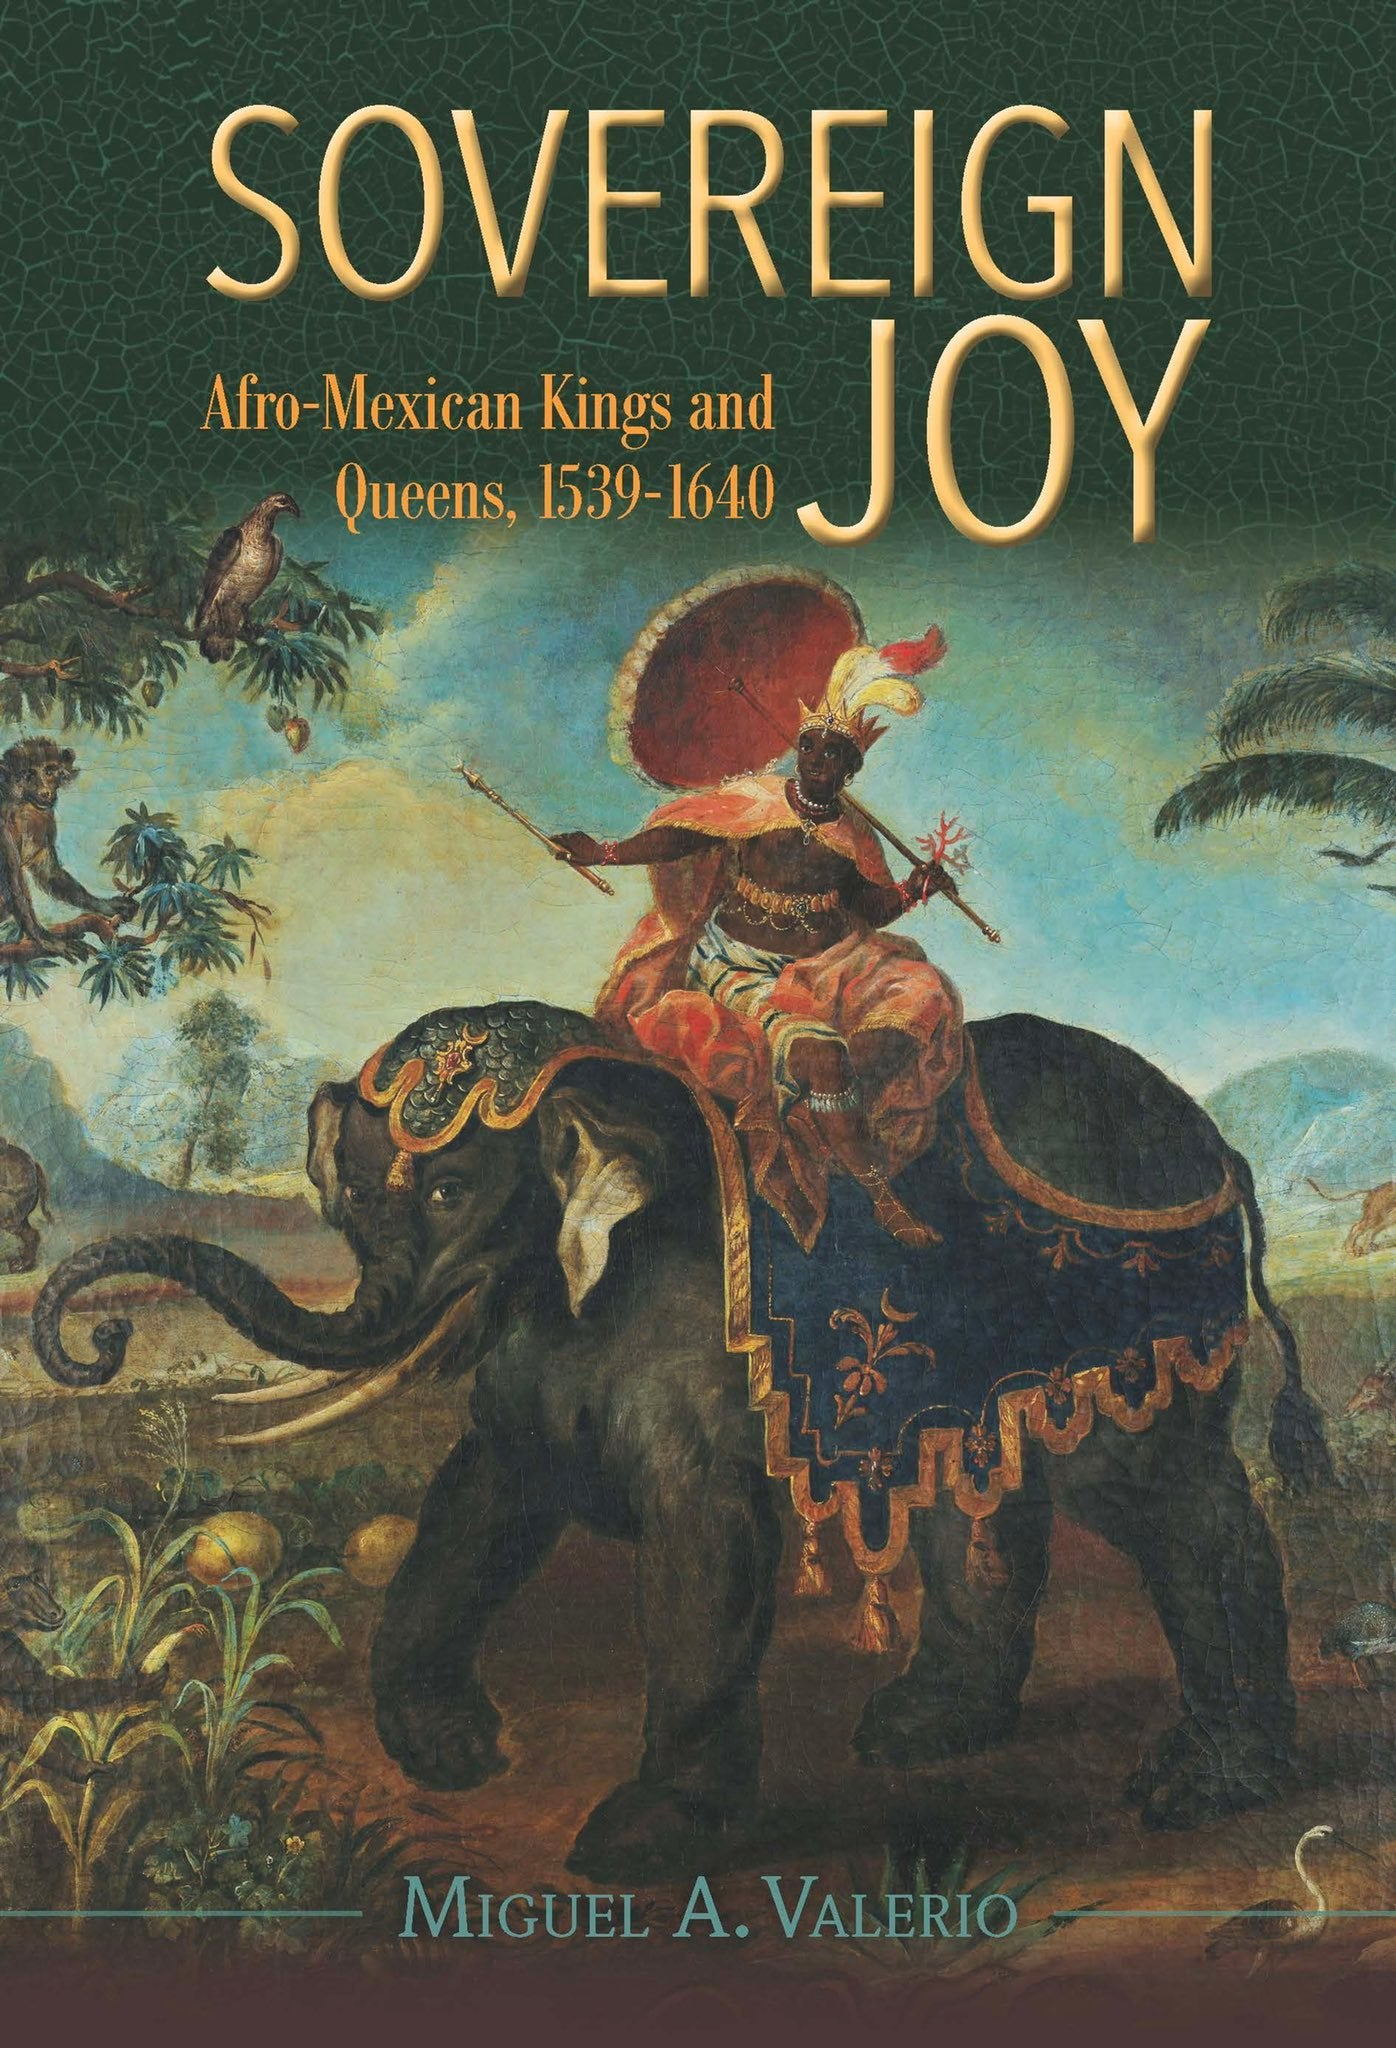 Sovereign Joy: Afro-Mexican Kings and Queens, 1539-1640